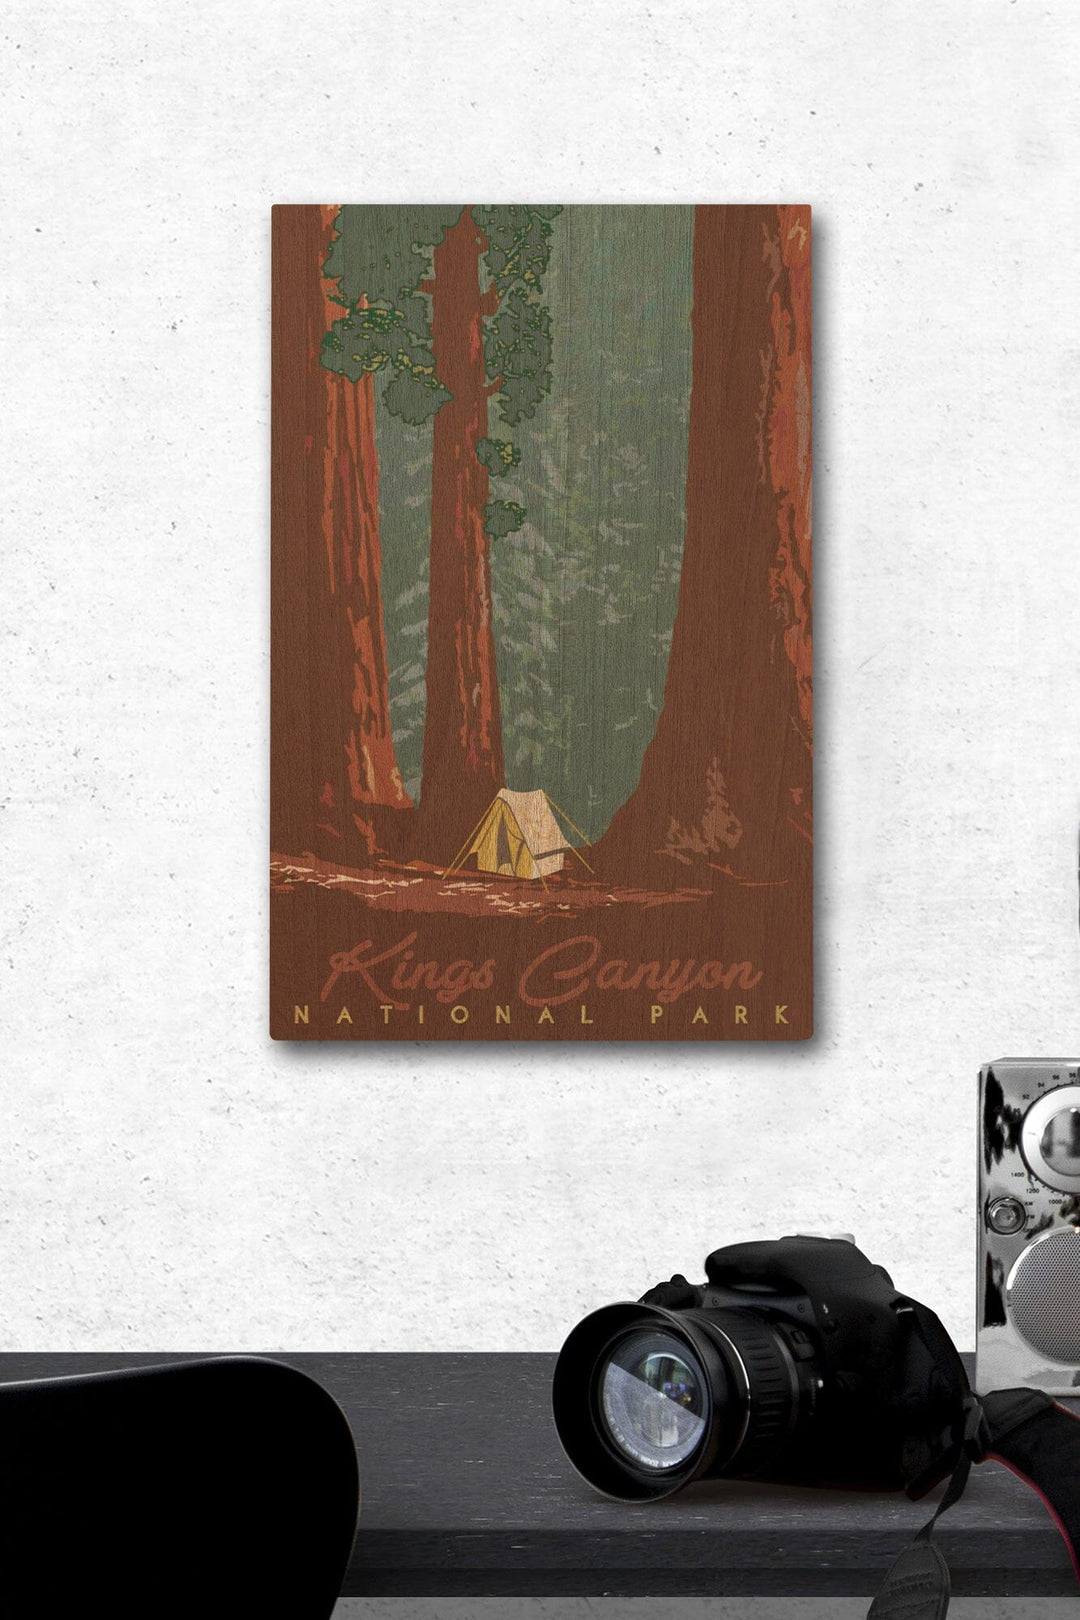 Kings Canyon National Park, California, Redwood Forest View, Sequoias & Tent, Lantern Press, Wood Signs and Postcards Wood Lantern Press 12 x 18 Wood Gallery Print 